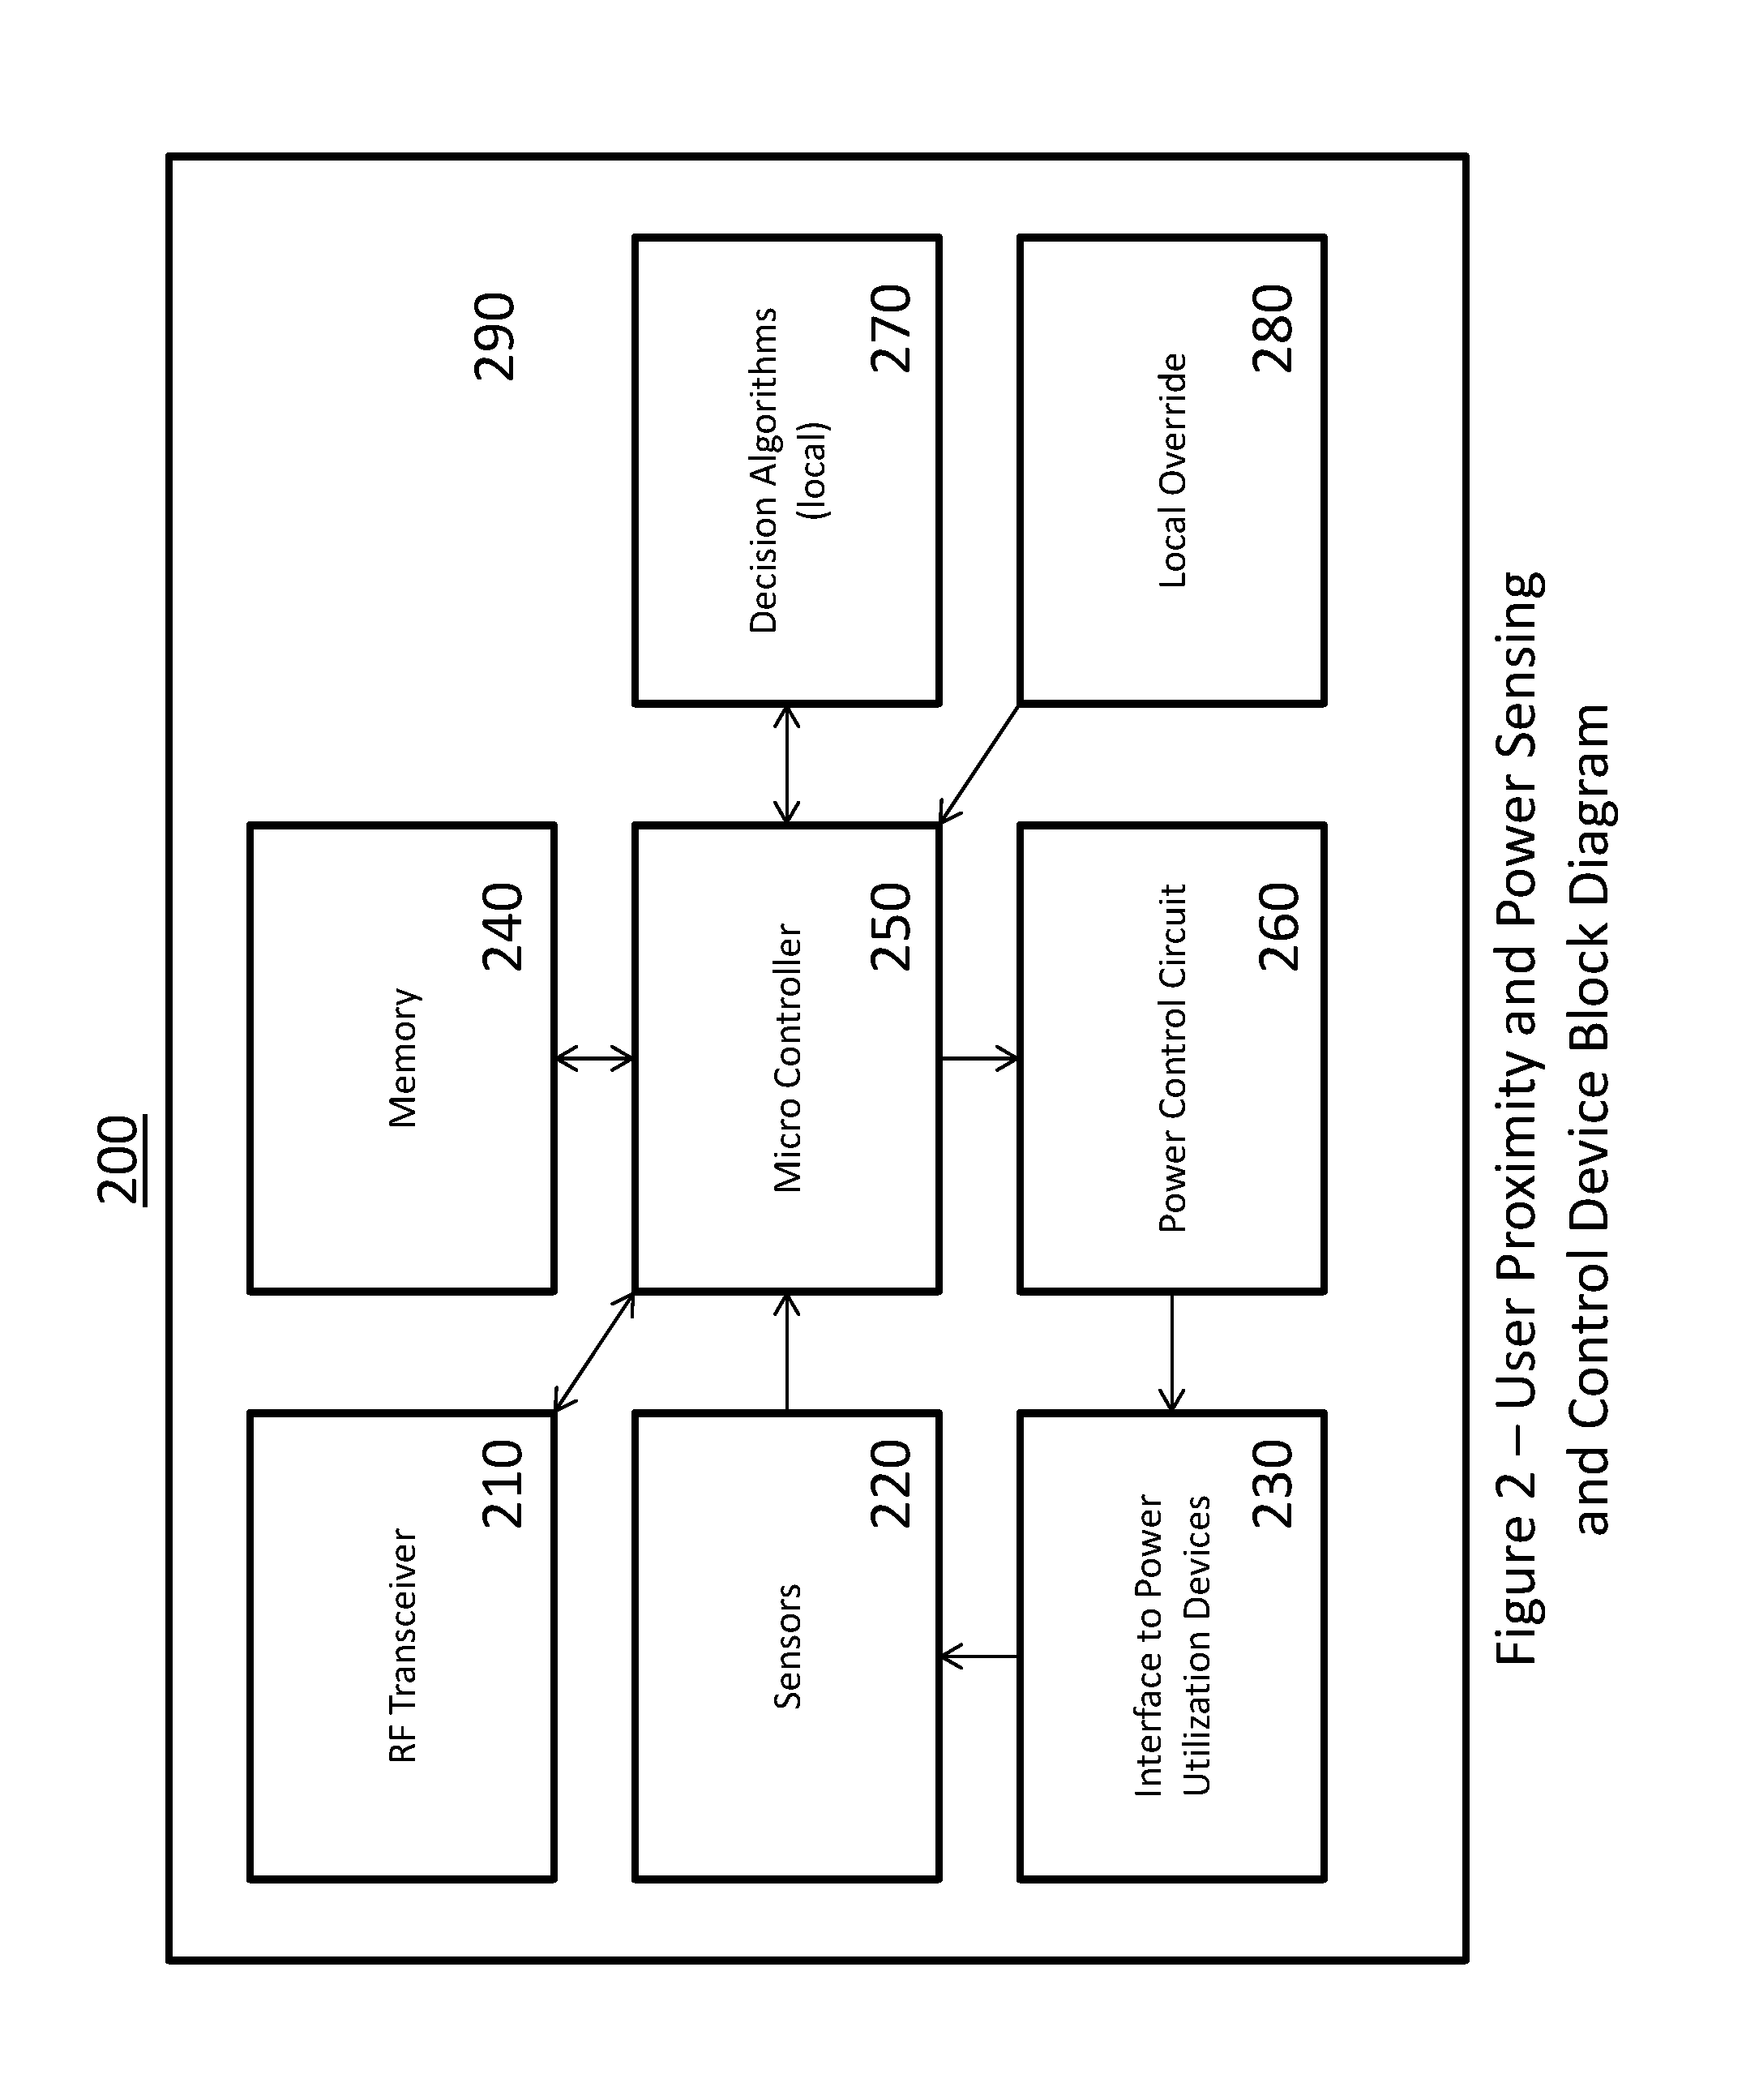 Method and System for Utilizing Proximity Lighting And Plug Controls For Real Time Location Sensing